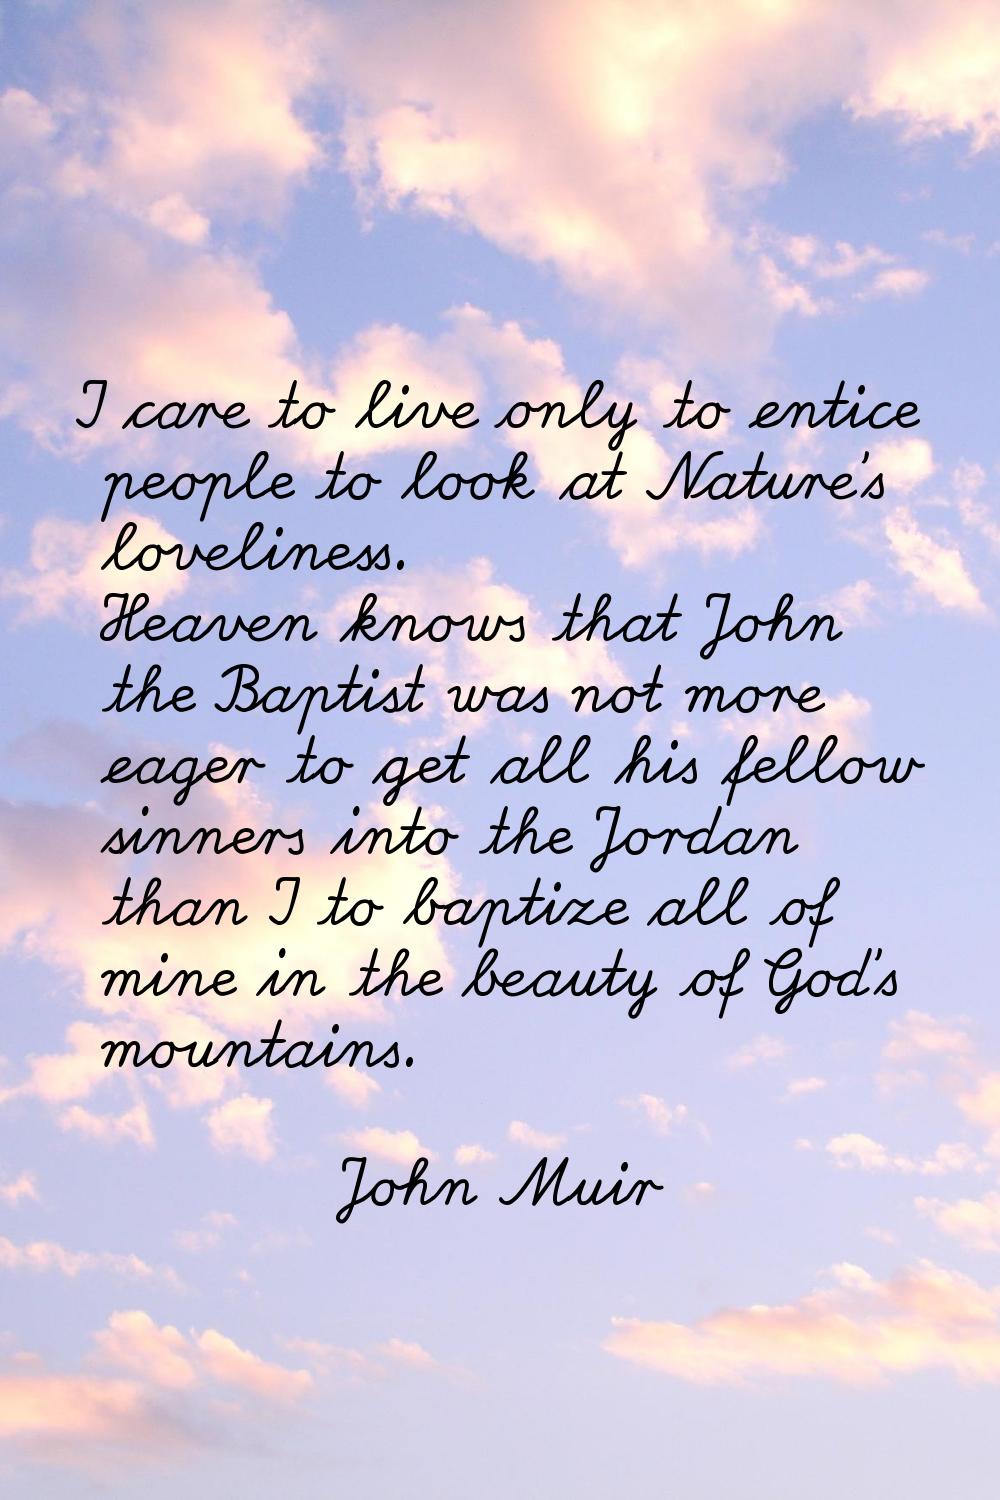 I care to live only to entice people to look at Nature's loveliness. Heaven knows that John the Bap